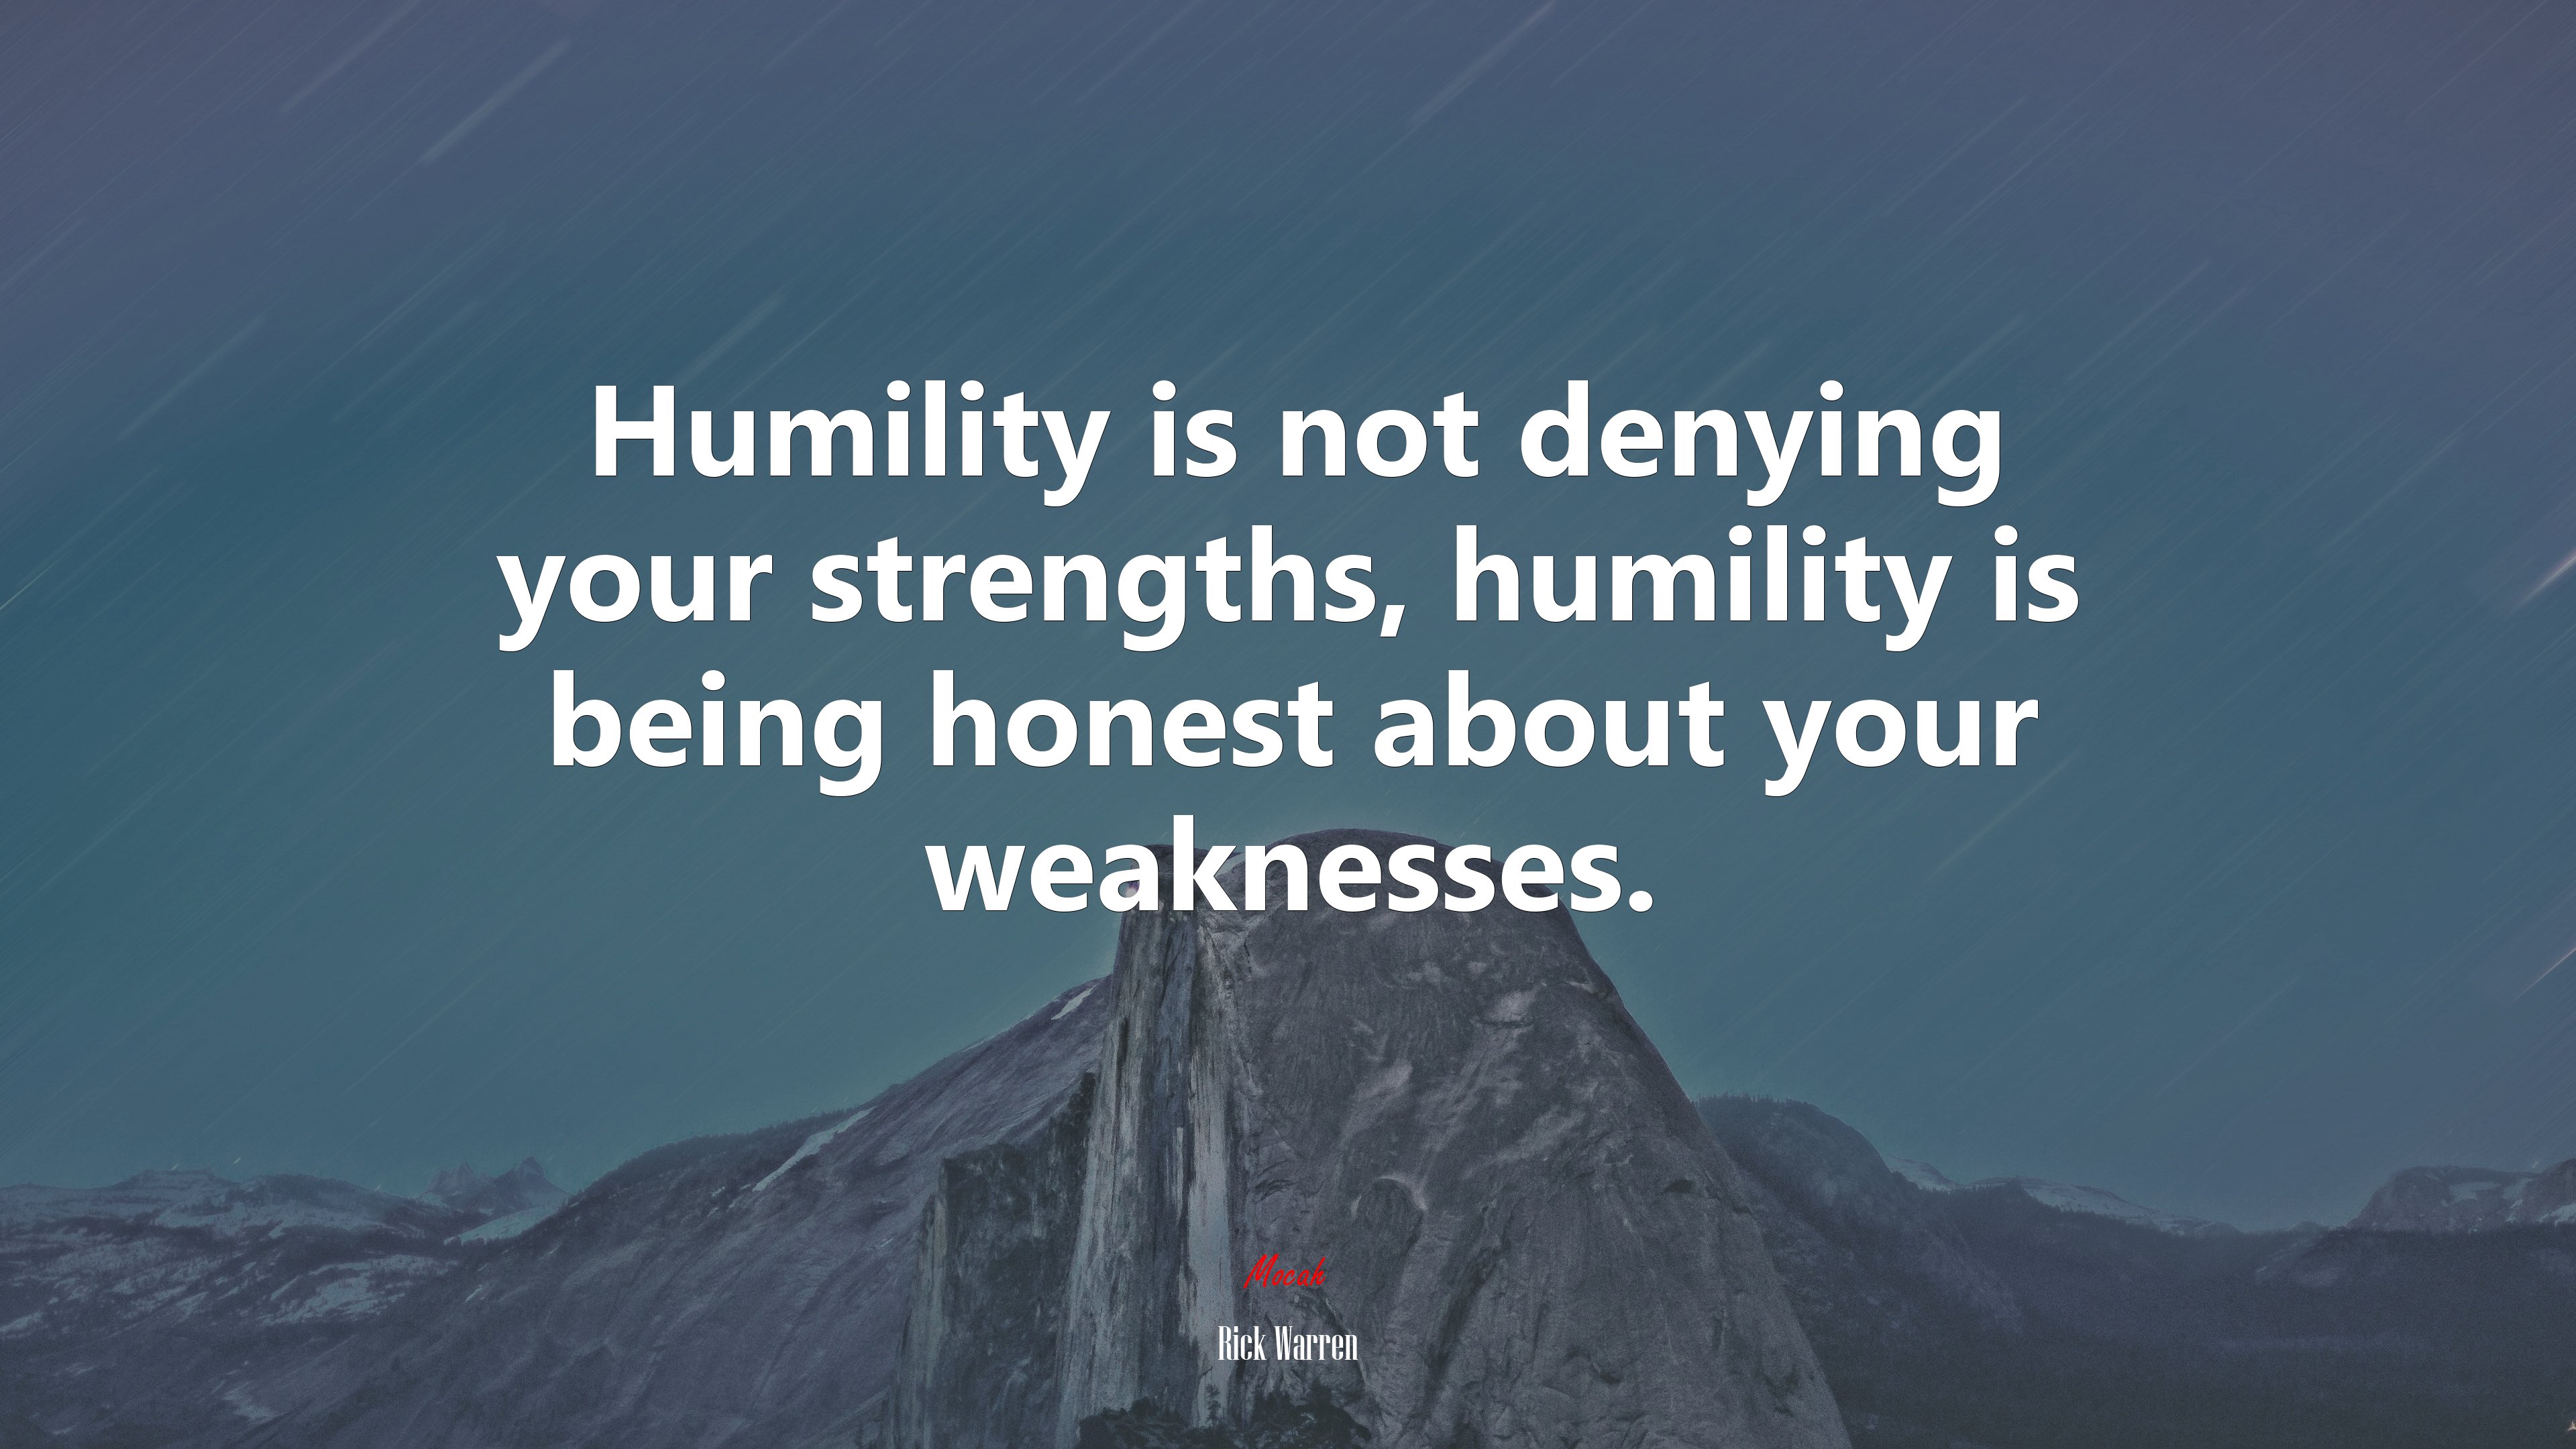 9651 Humility Images Stock Photos  Vectors  Shutterstock